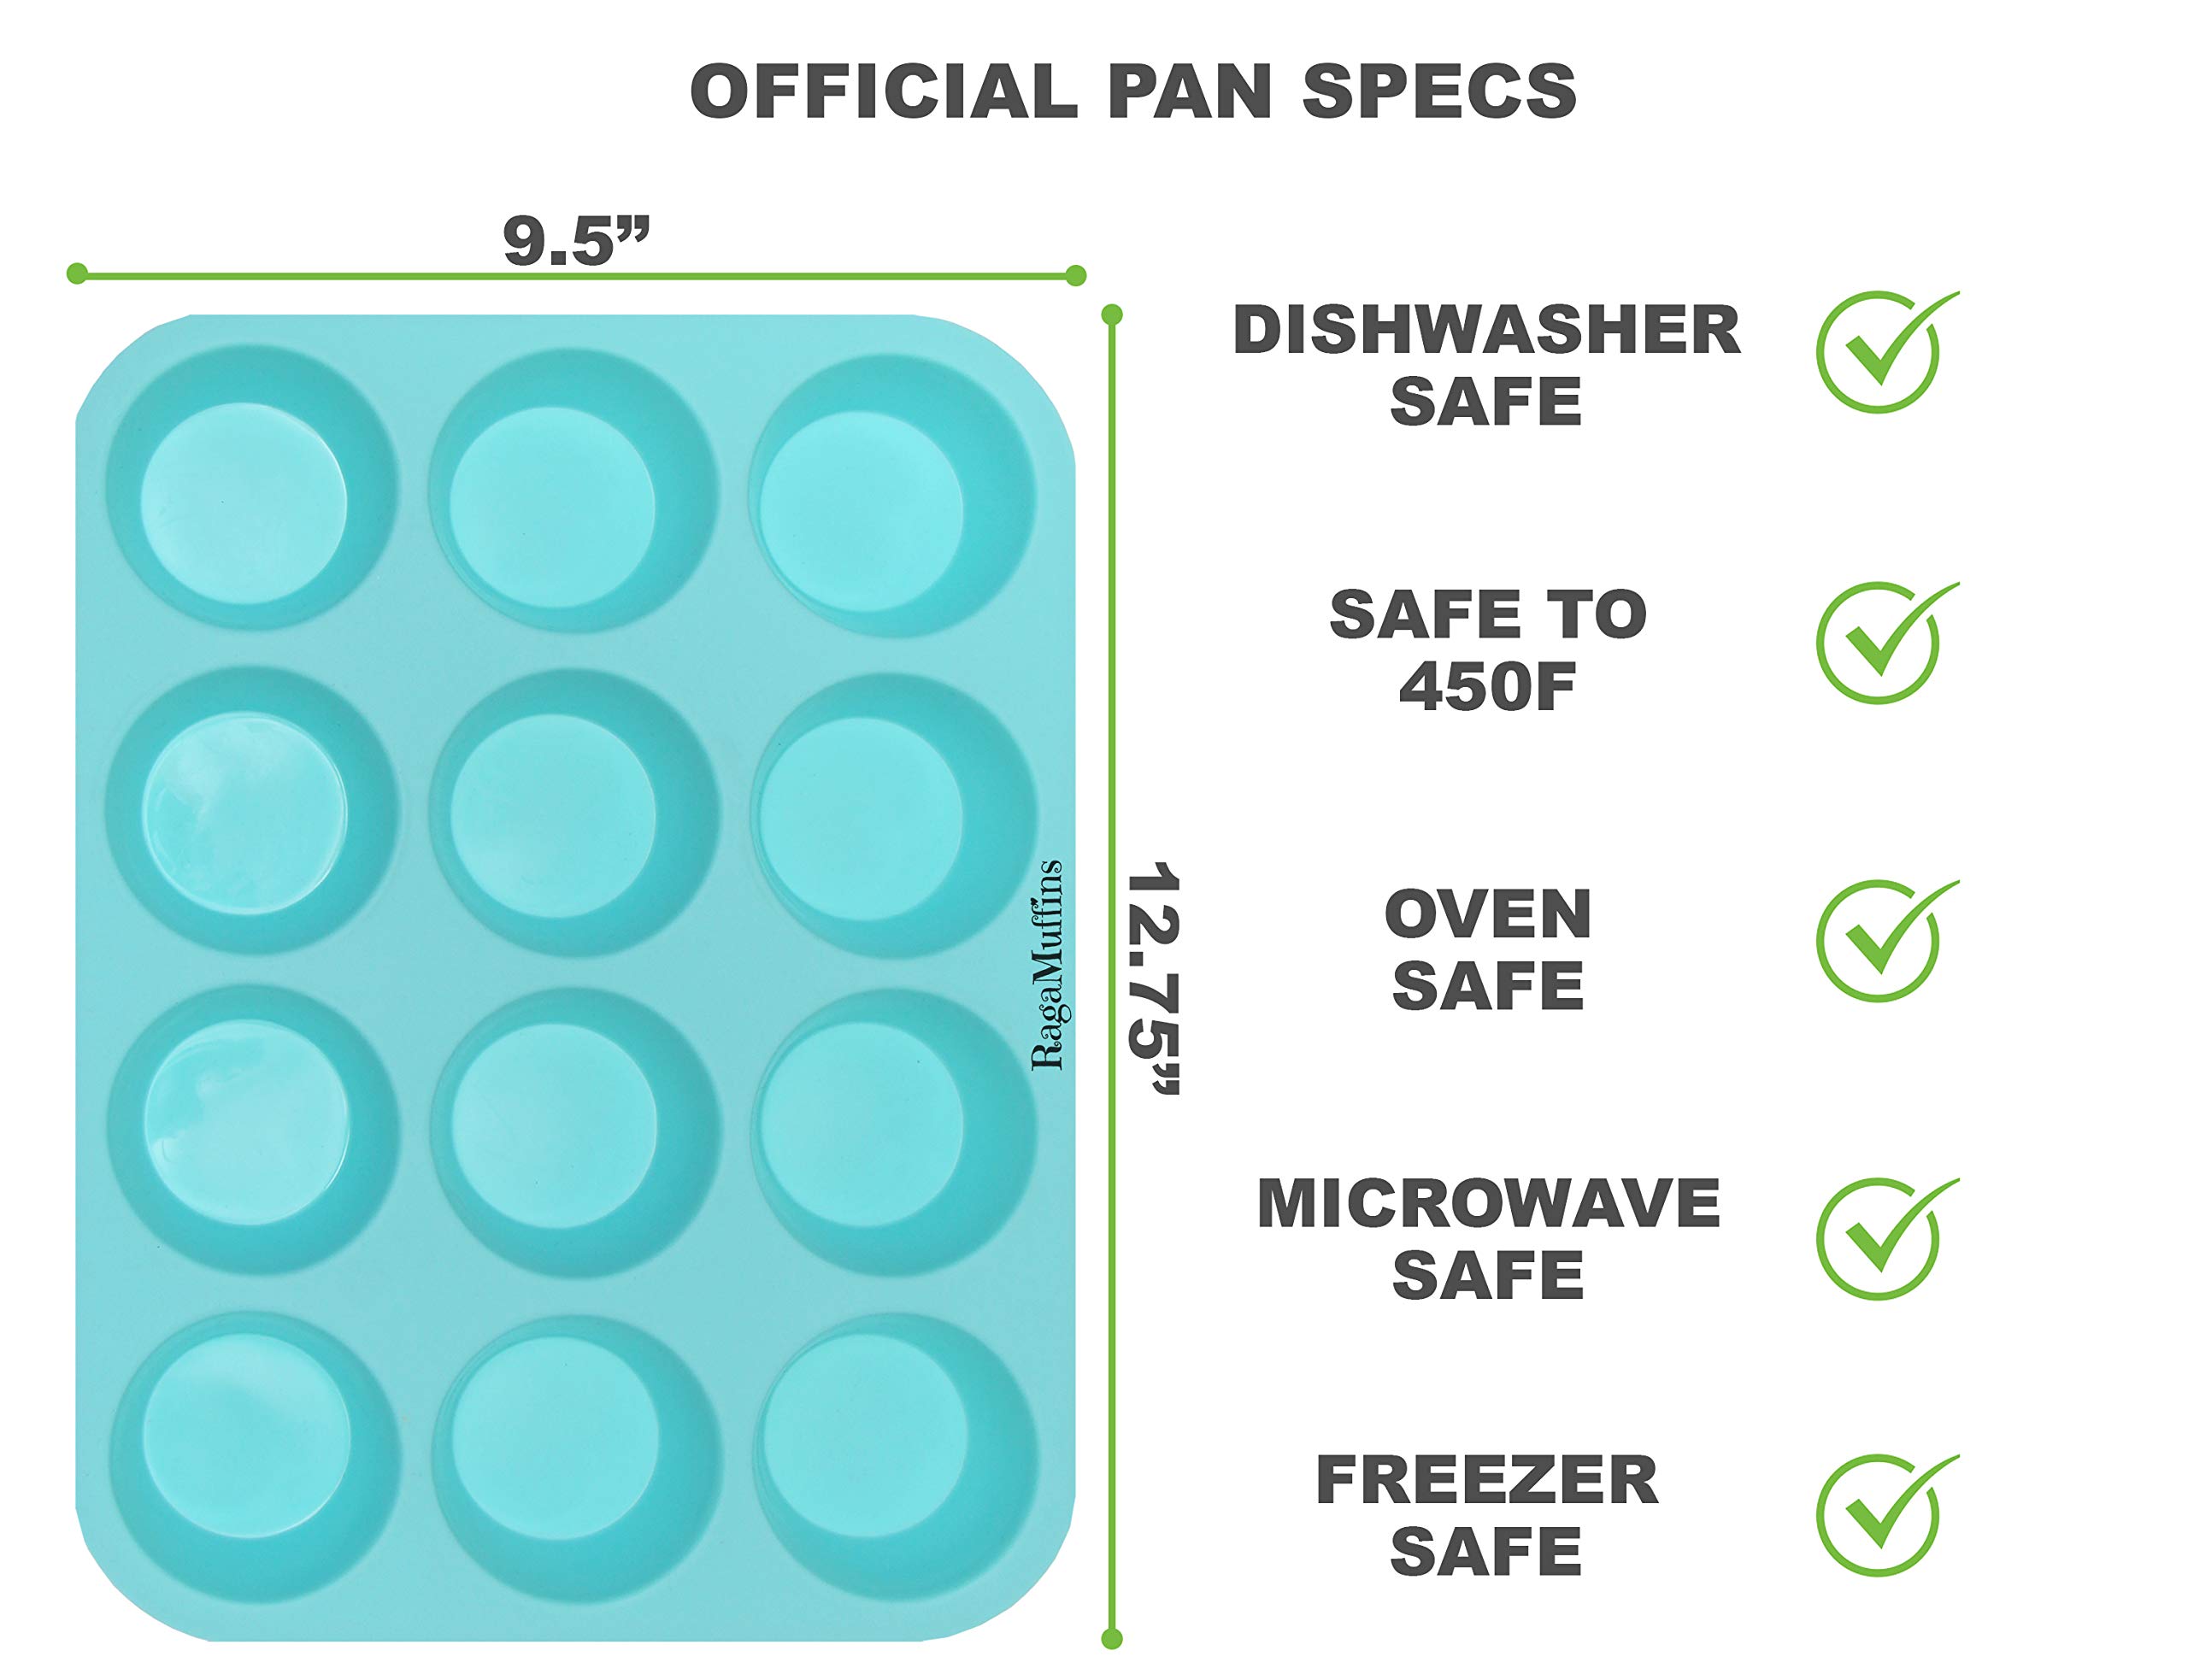 PDTXCLS HOMIEBUDS Silicone Baking Pan Cupcakes Muffins Mold 12 Cup 100% Non-Stick BPA Free Food Grade Silicone in Aqua- 1 pan by Ragamuffins